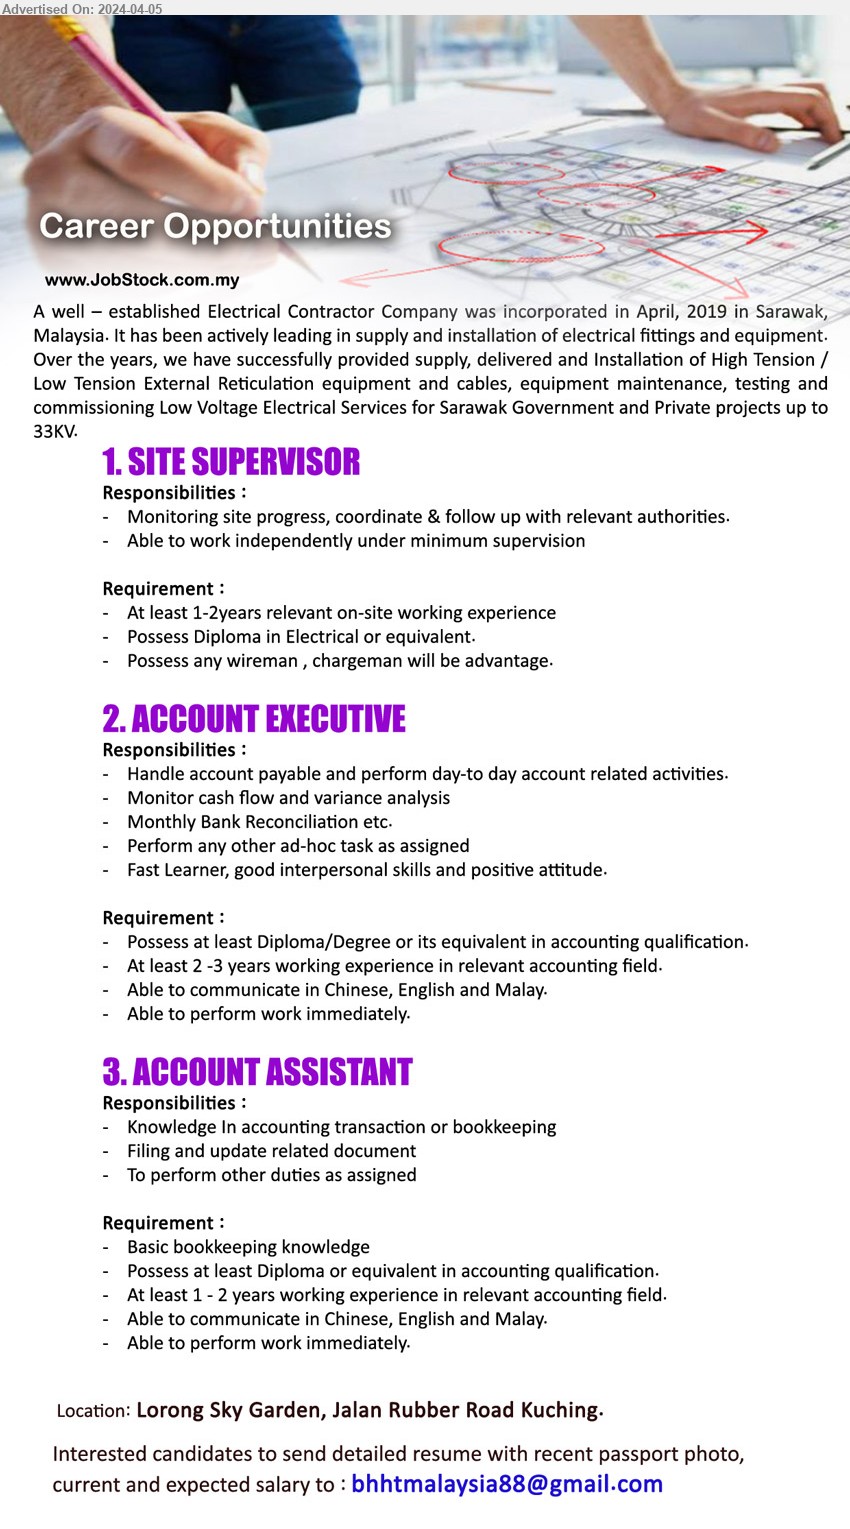 ADVERTISER (Electrical Contractor Company) - 1. SITE SUPERVISOR  (Kuching), Diploma in Electrical , 1-2 yrs. exp.,...
2. ACCOUNT EXECUTIVE (Kuching),  Diploma/Degree or its equivalent in accounting, At least 2 -3 years working experience in relevant accounting field.,...
3. ACCOUNT ASSISTANT (Kuching), Basic bookkeeping knowledge, Possess at least Diploma or equivalent in accounting ,...
Email resume to ...